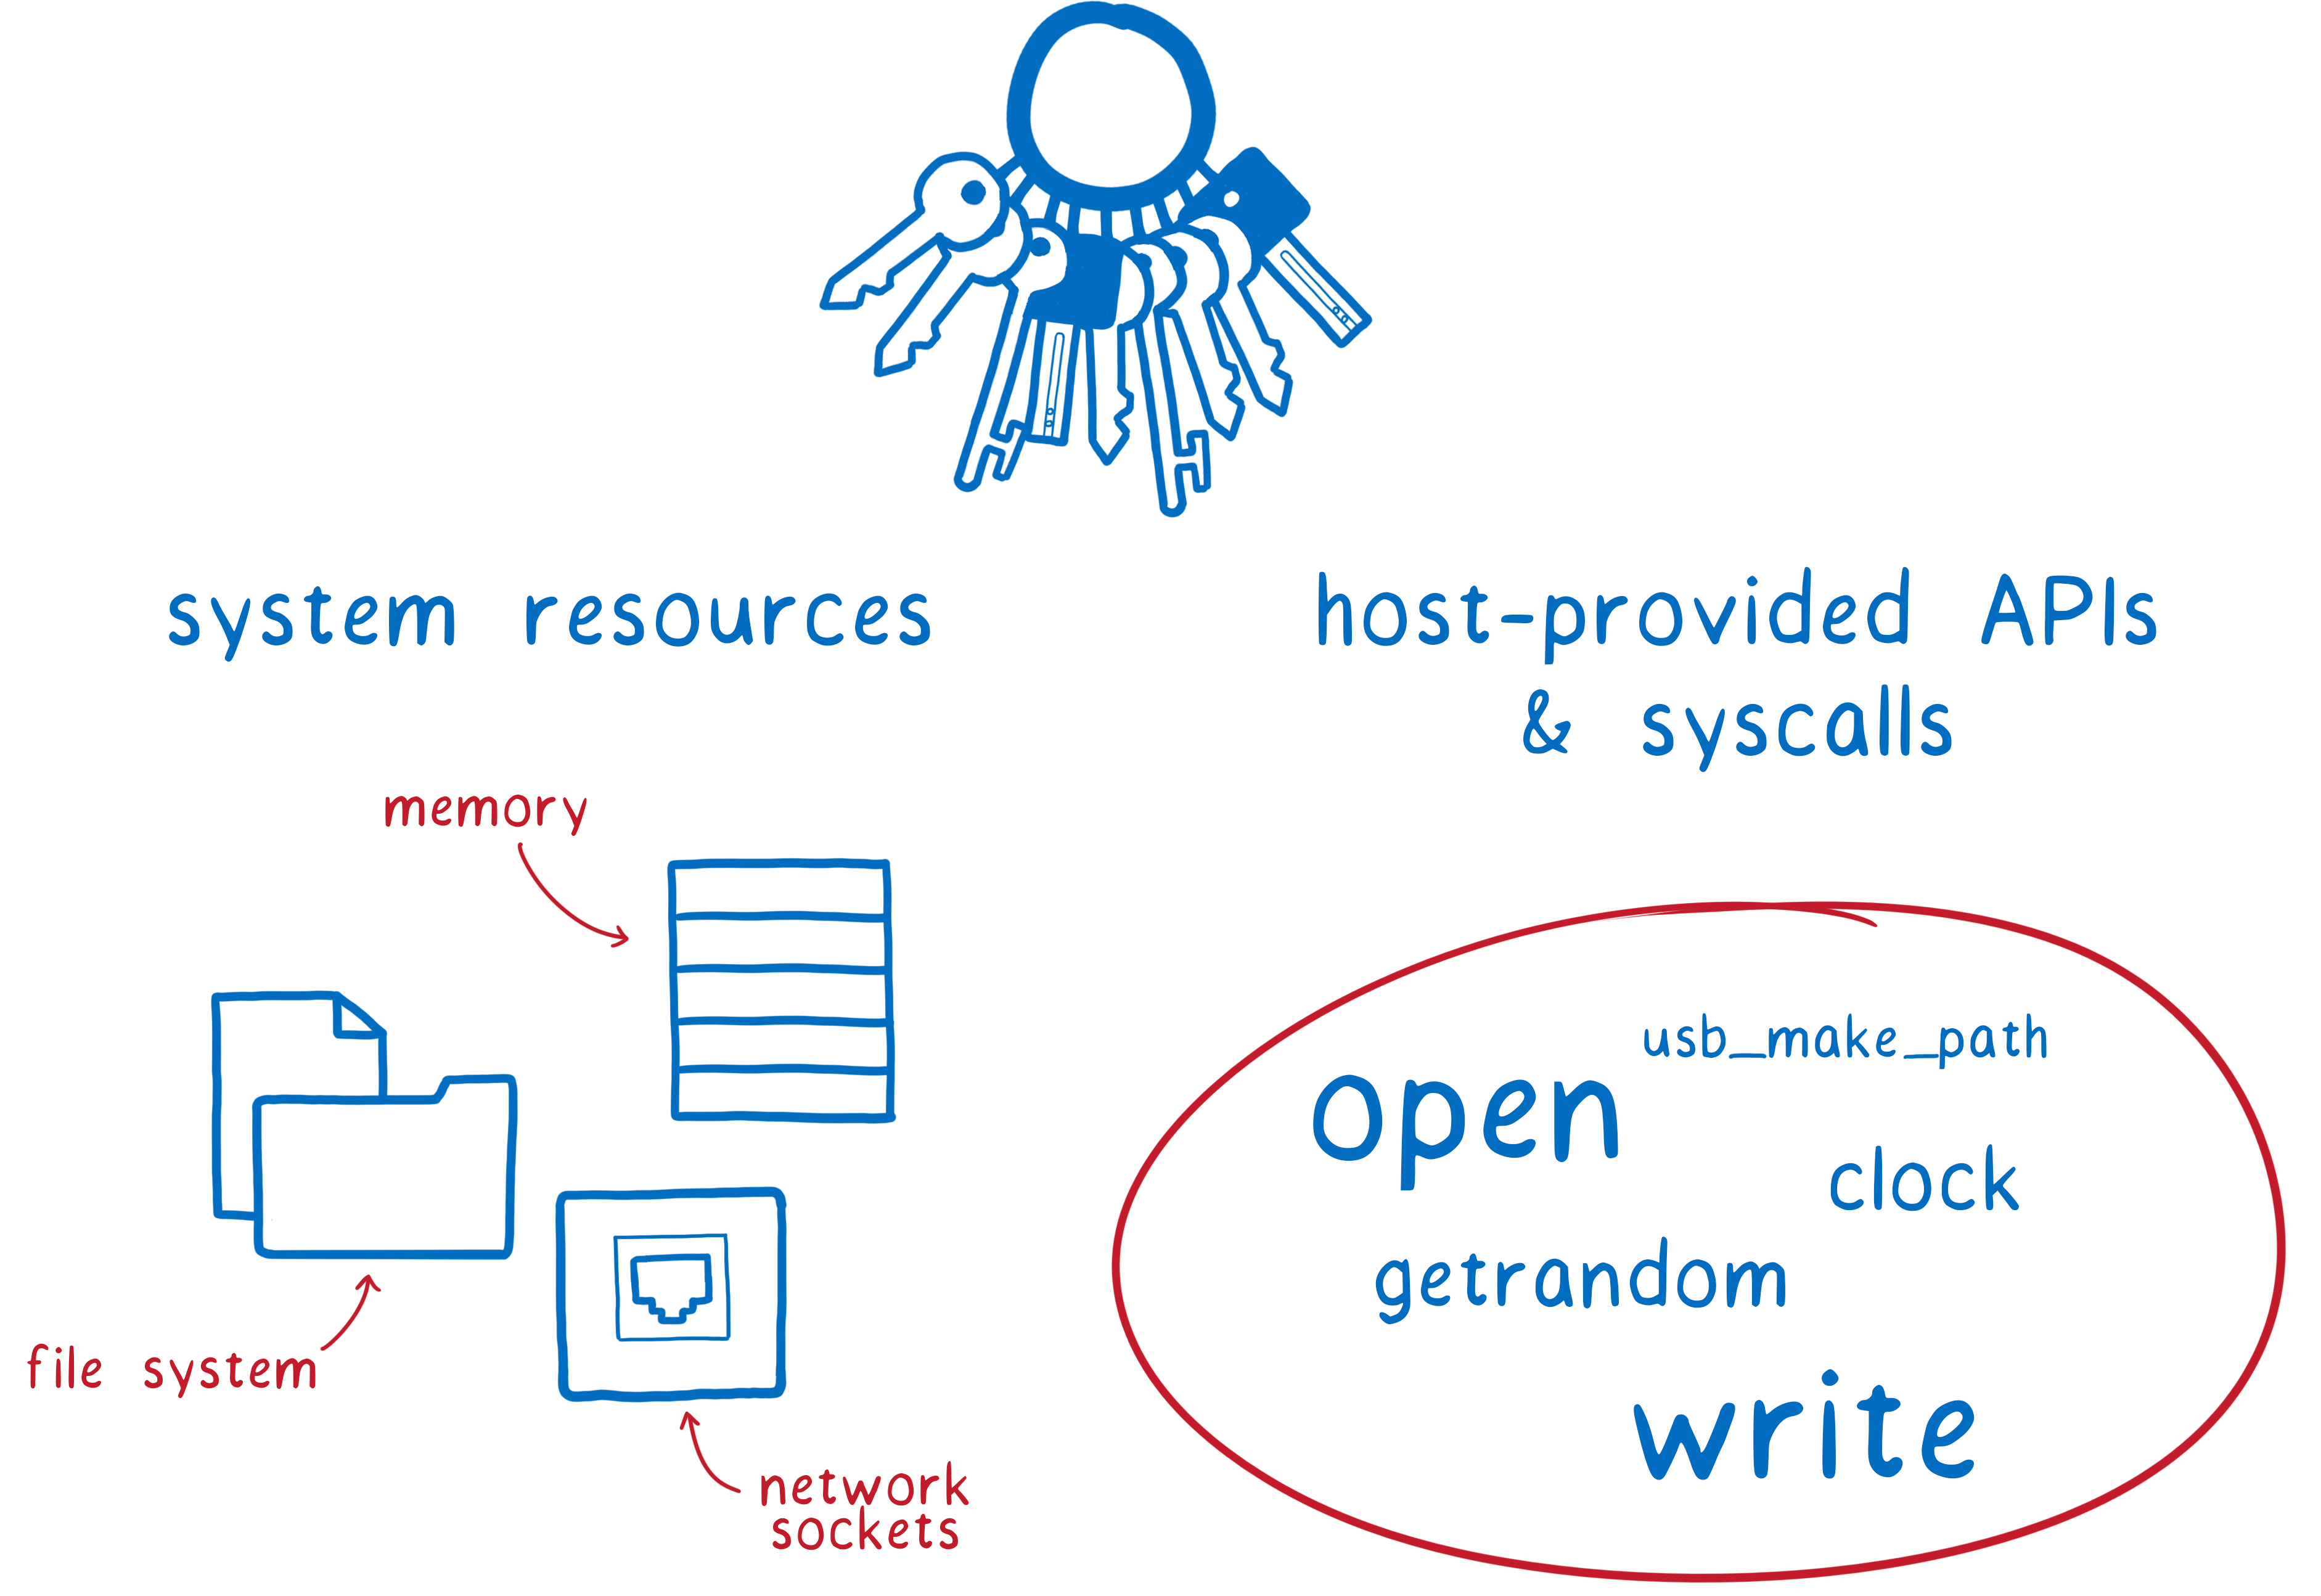 system resources on one side, including memory, file system, and network connections. Host-provided APIs and syscalls on the other side, including open, write, getrandom, clock, and usb_make_path